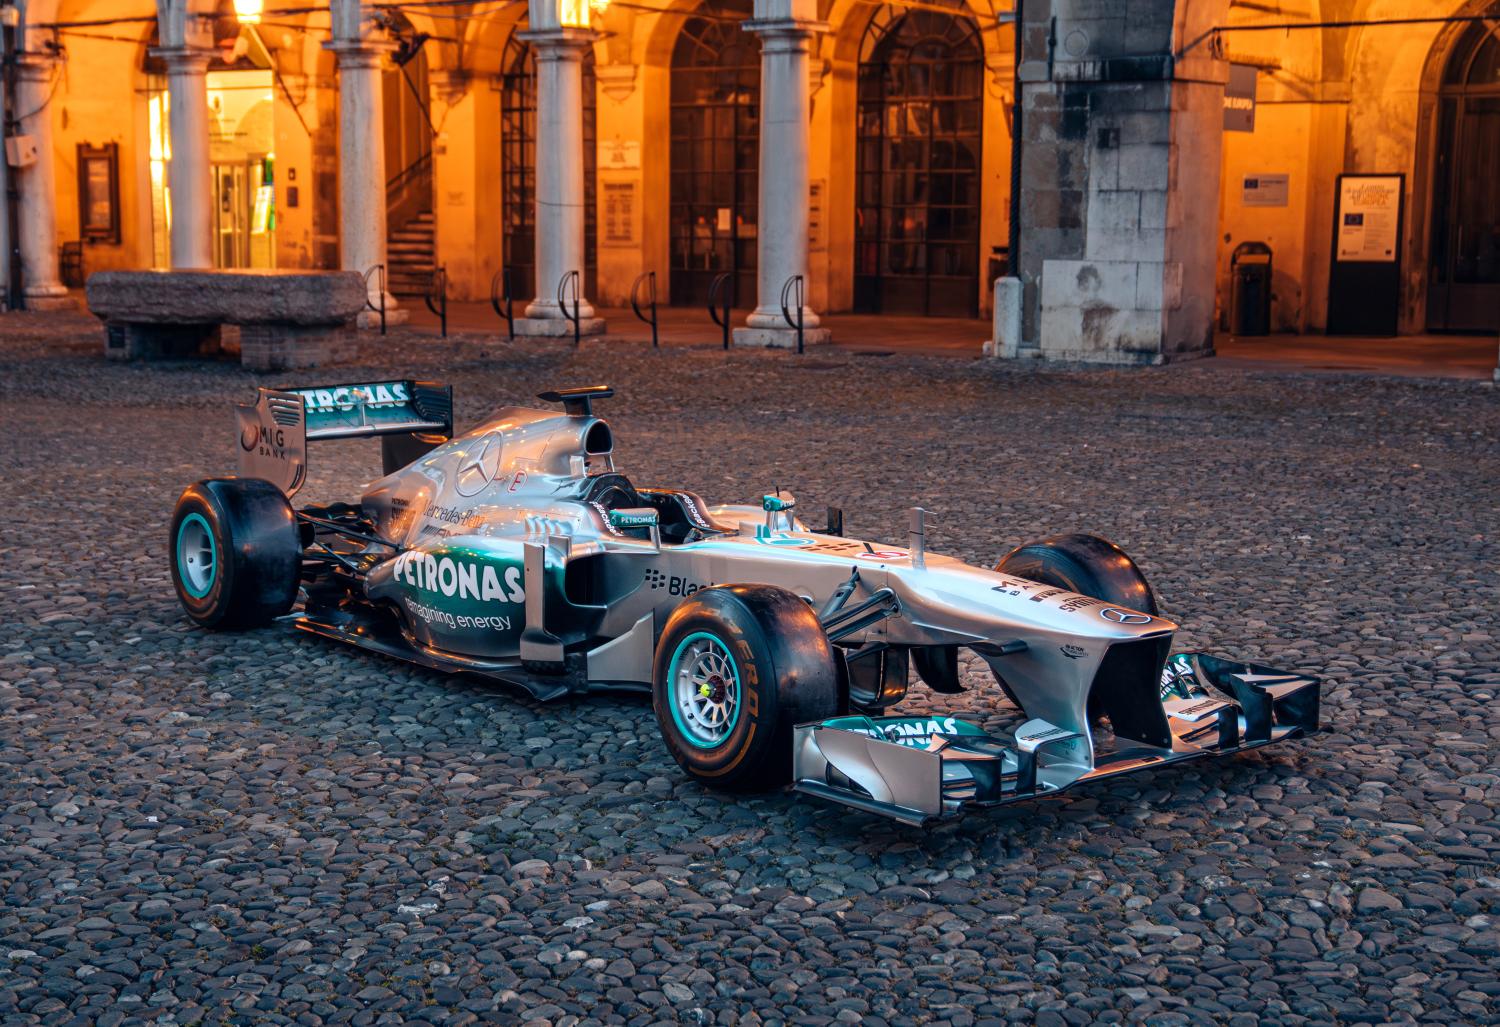 Lewis Hamilton’s First Race-Winning Mercedes F1 Car Is Up For Auction